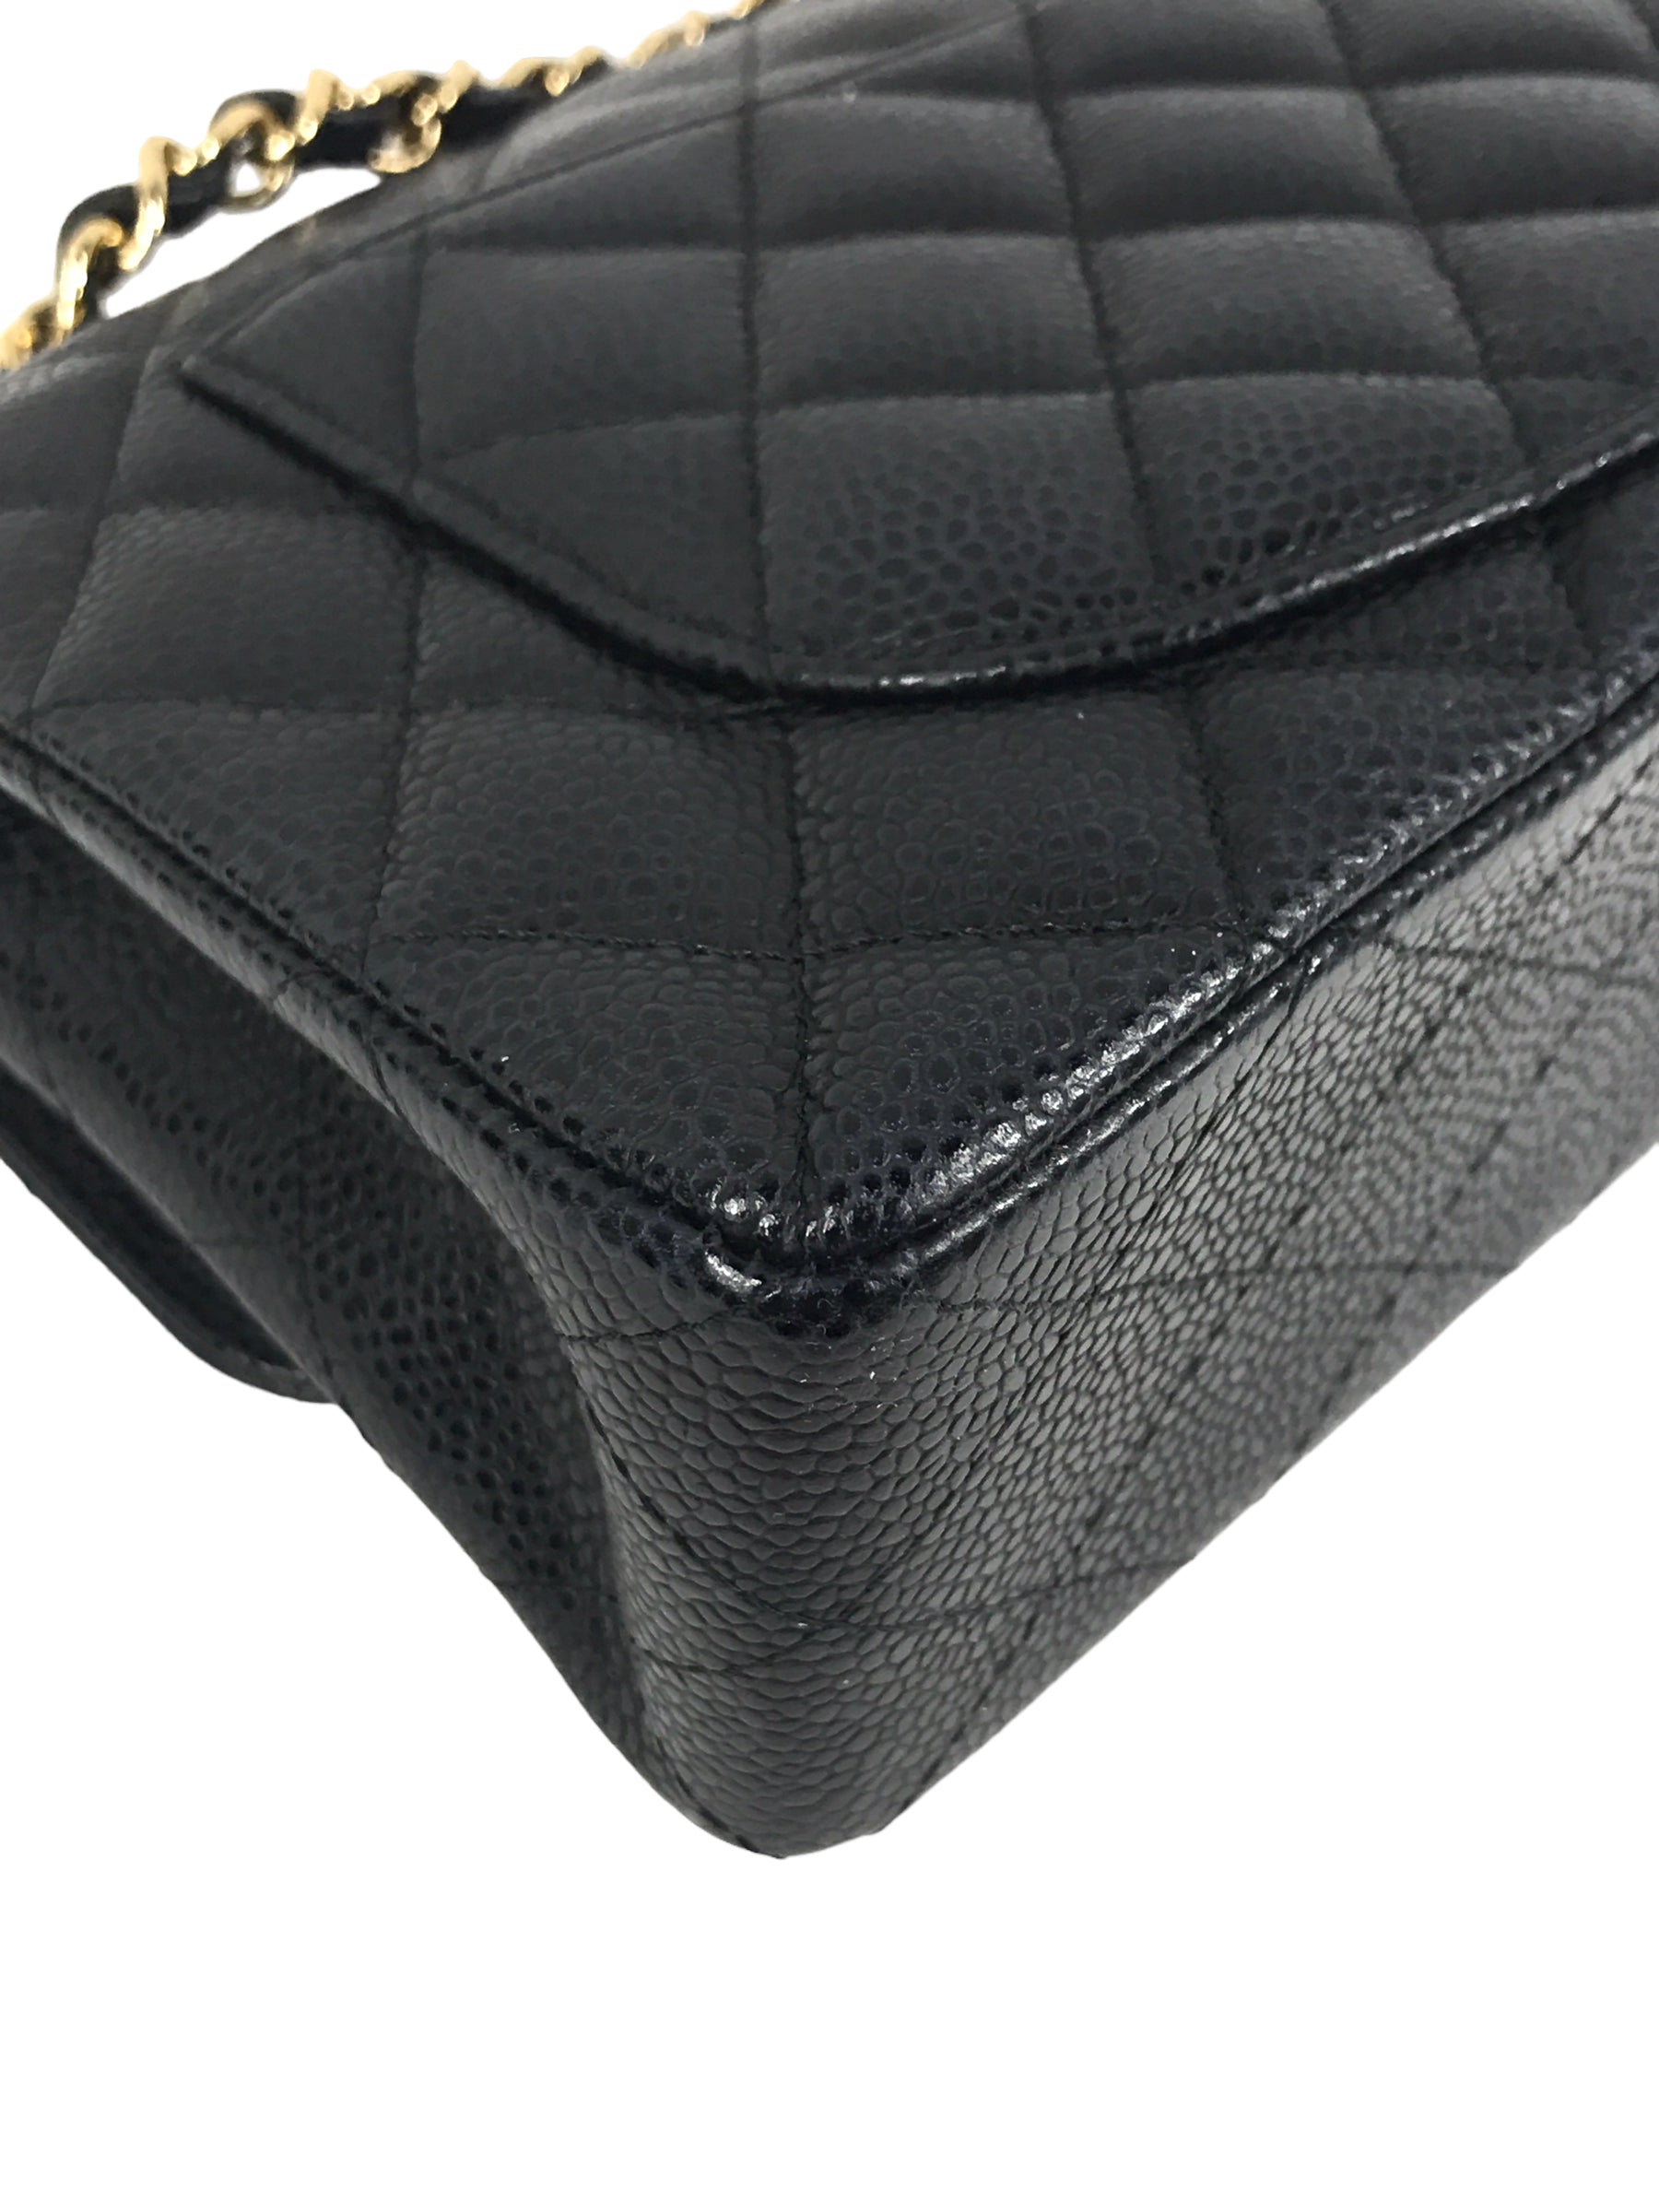 Black Caviar Quilted Small Classic Flap Bag W/GHW